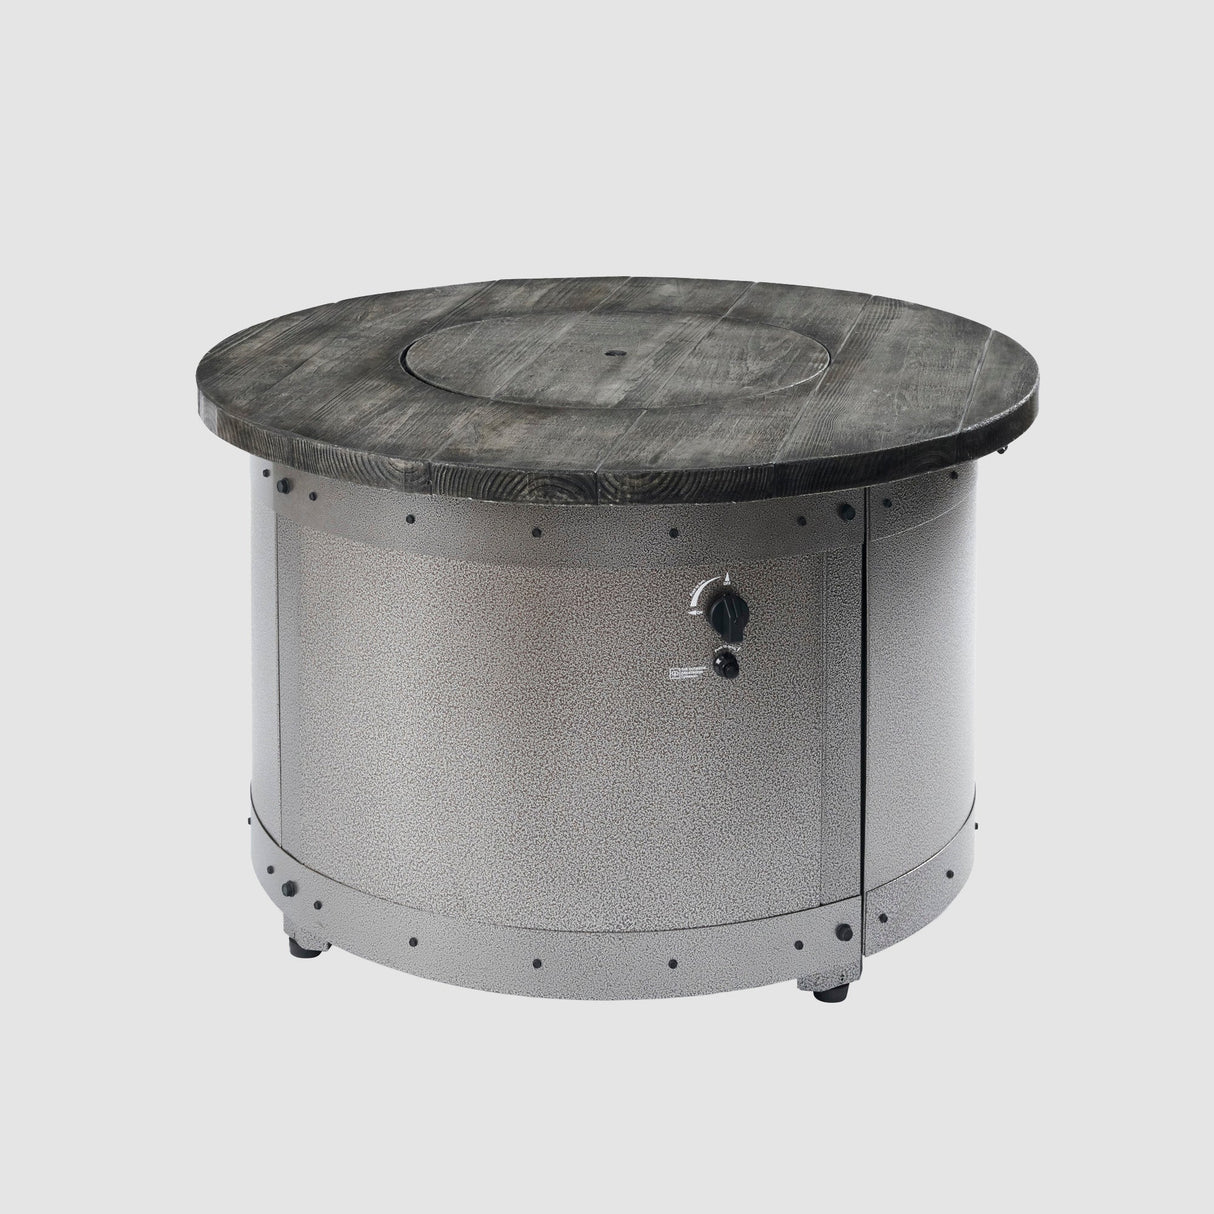 A cover placed on the top of an Edison Round Gas Fire Pit Table on a grey background